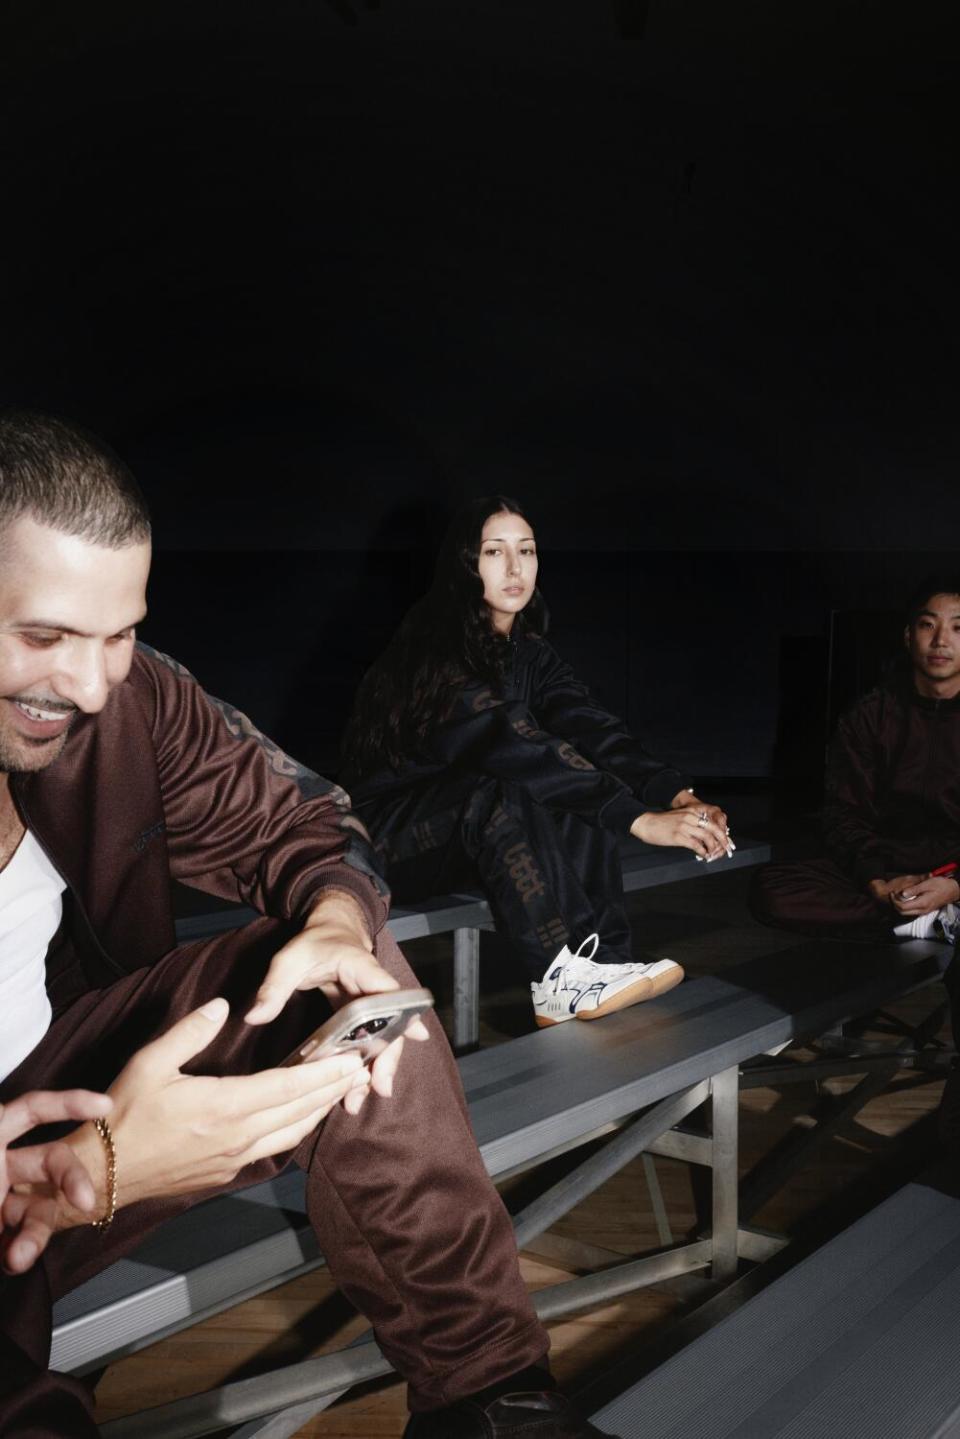 A photo of three people hanging out on bleachers in a dark gym.